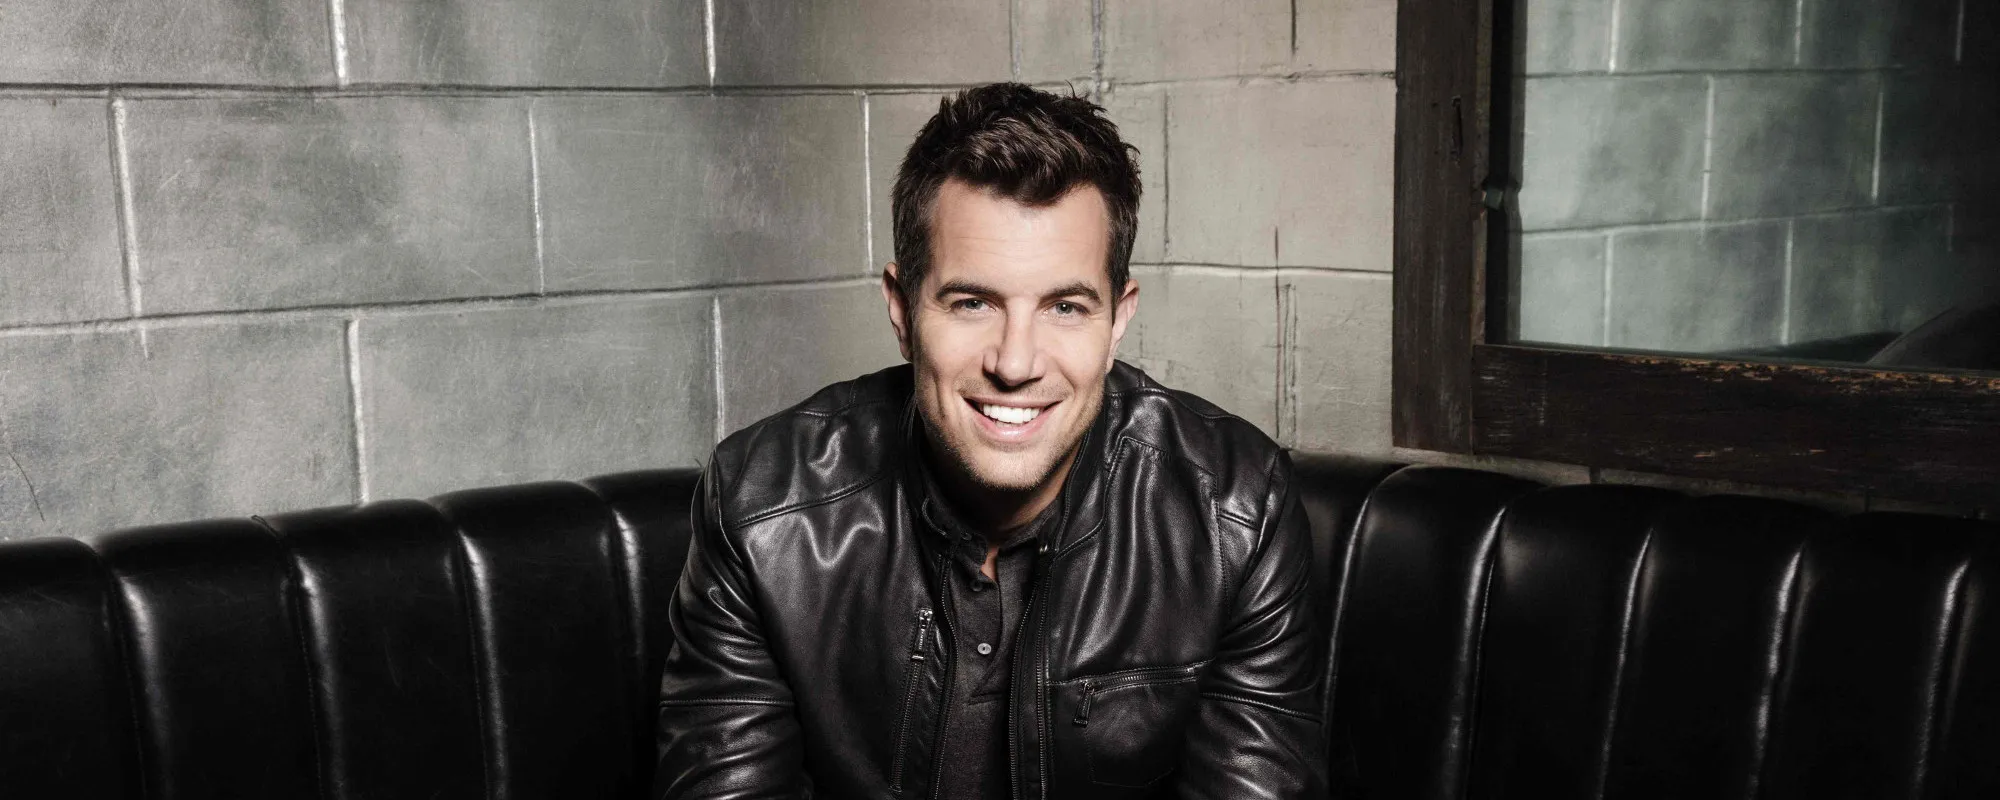 Nick Hexum on The Origins of 311, Keys to Success and TwoMonth Tour